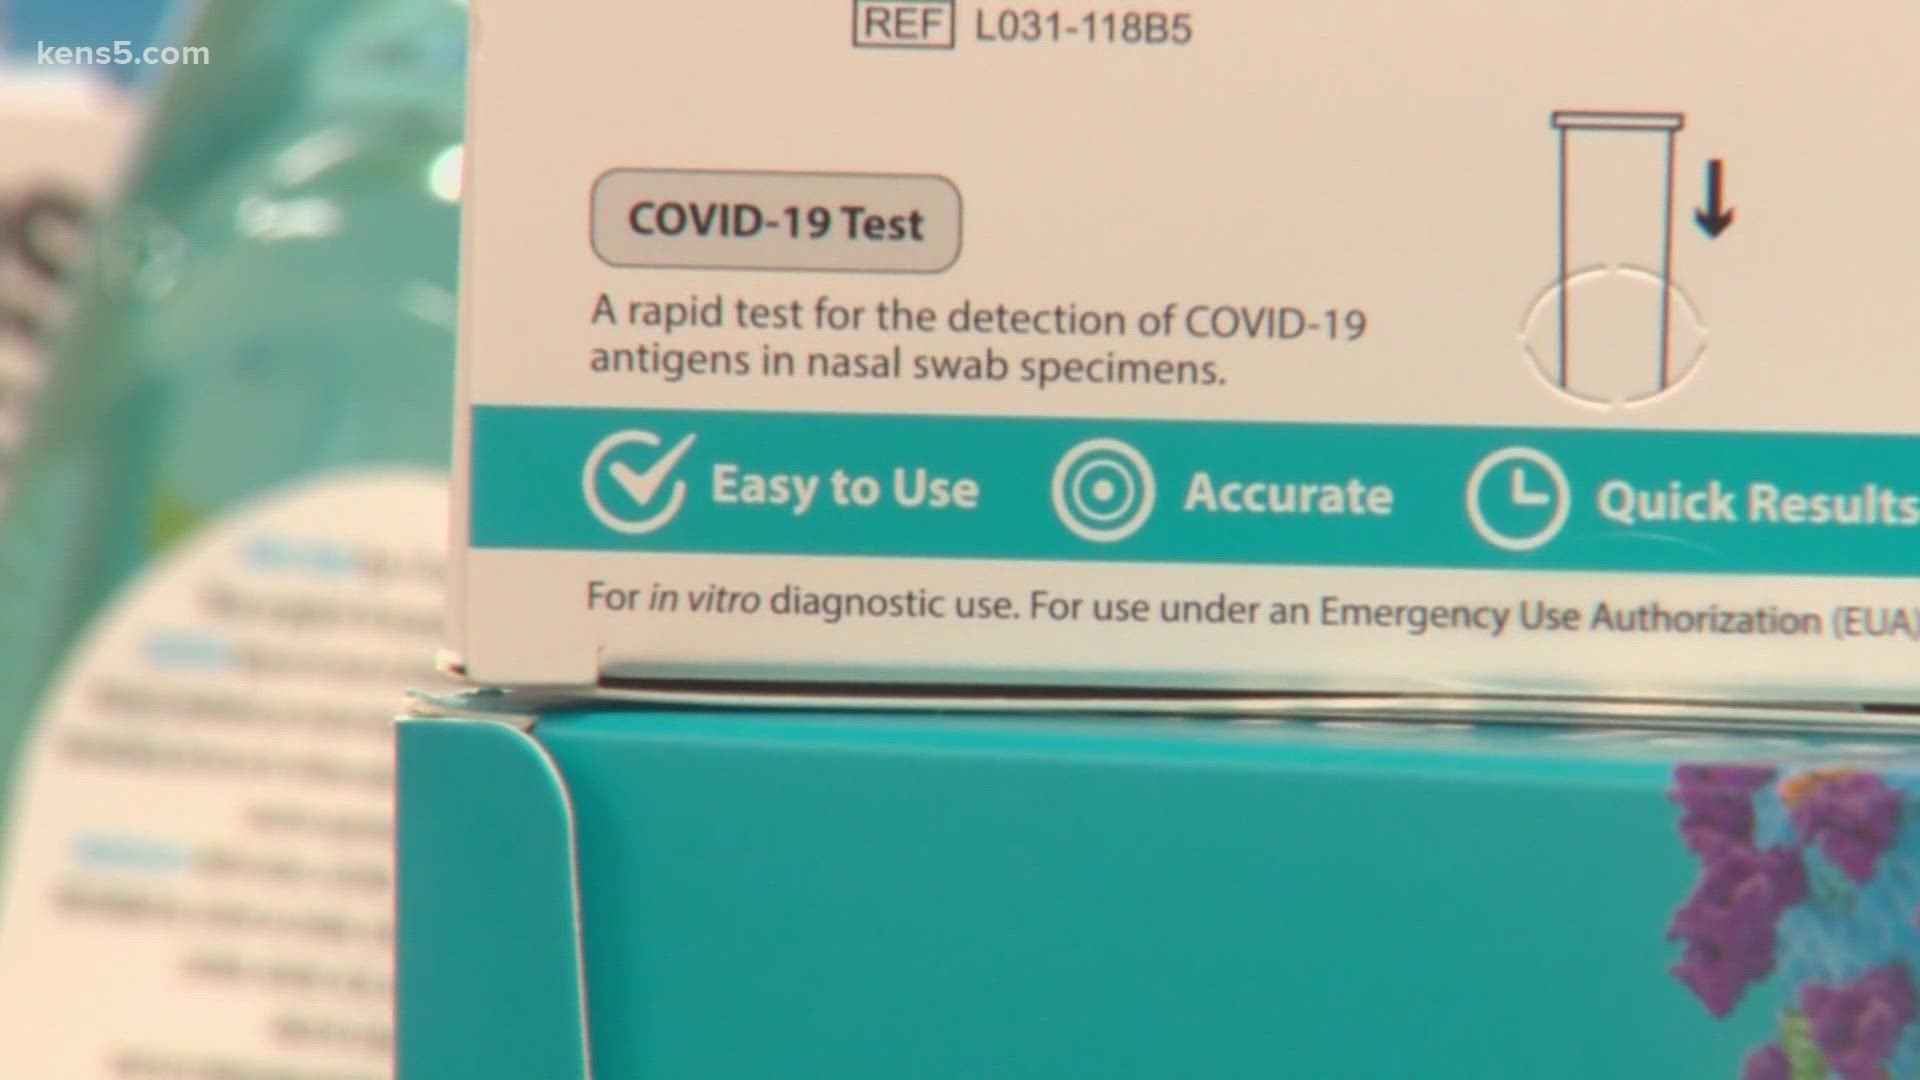 The Biden administration had pledged to provide 500 million at-home rapid test kits come the New Year.